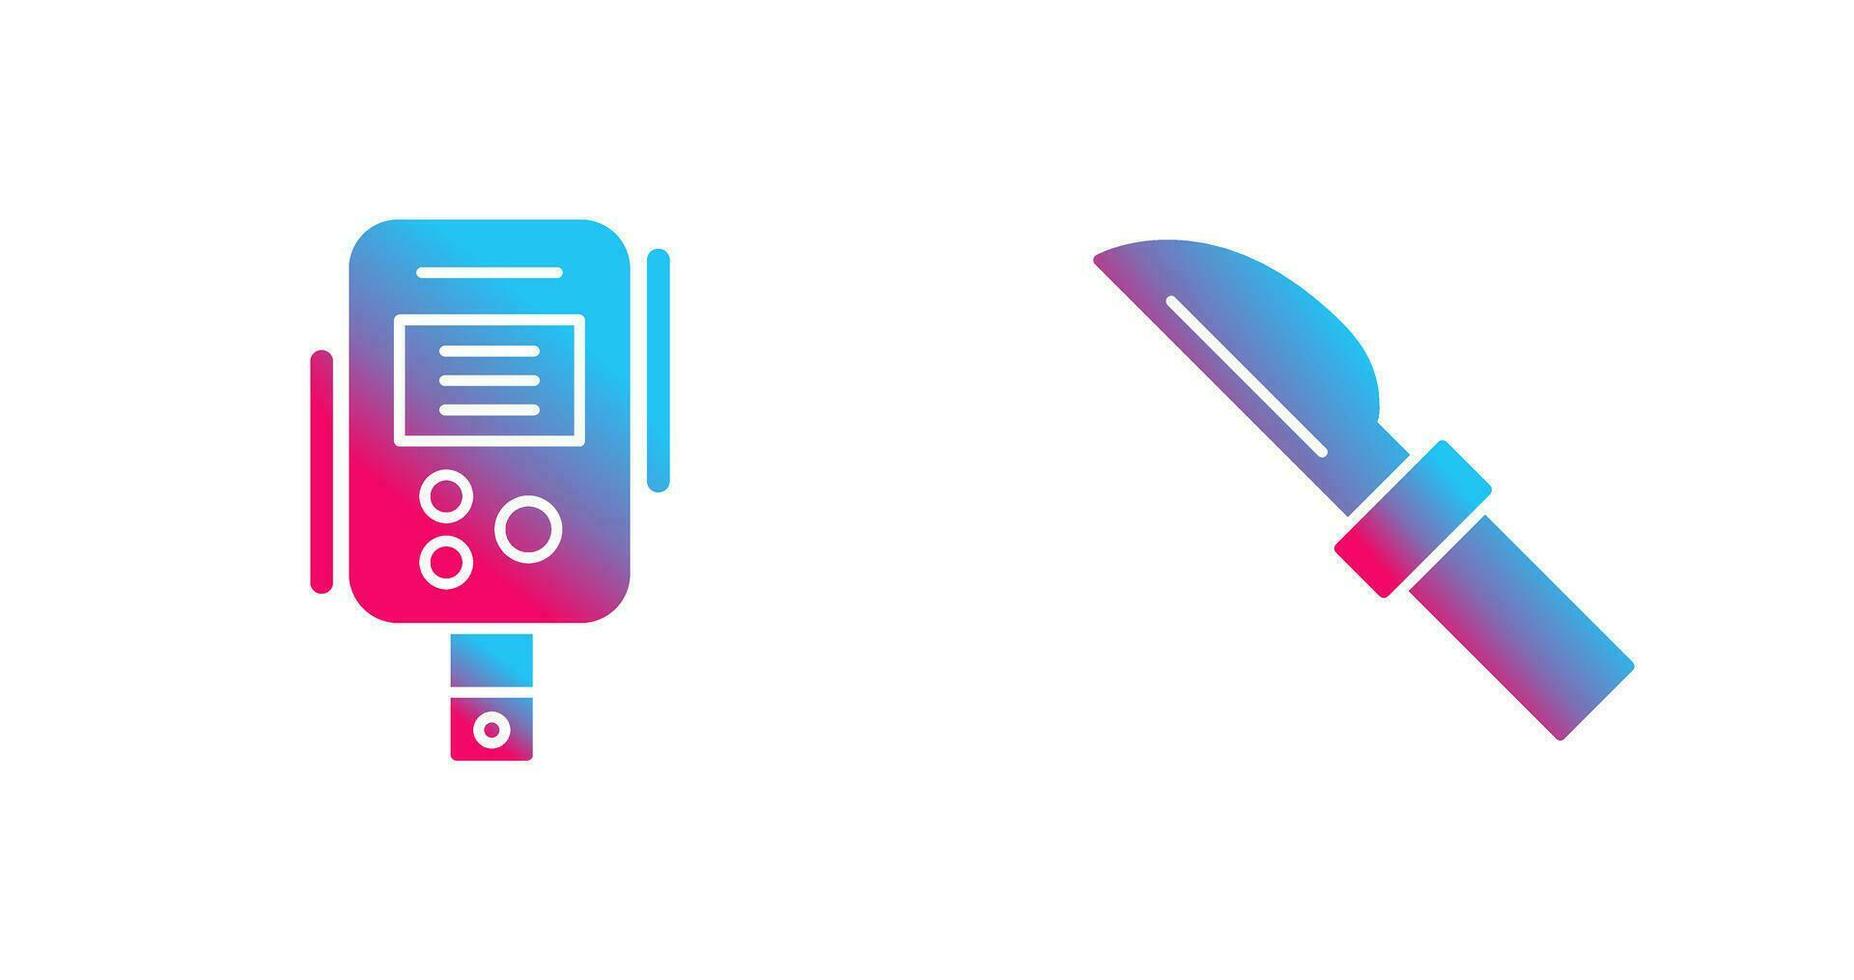 Diabetes Test and Knife Icon vector